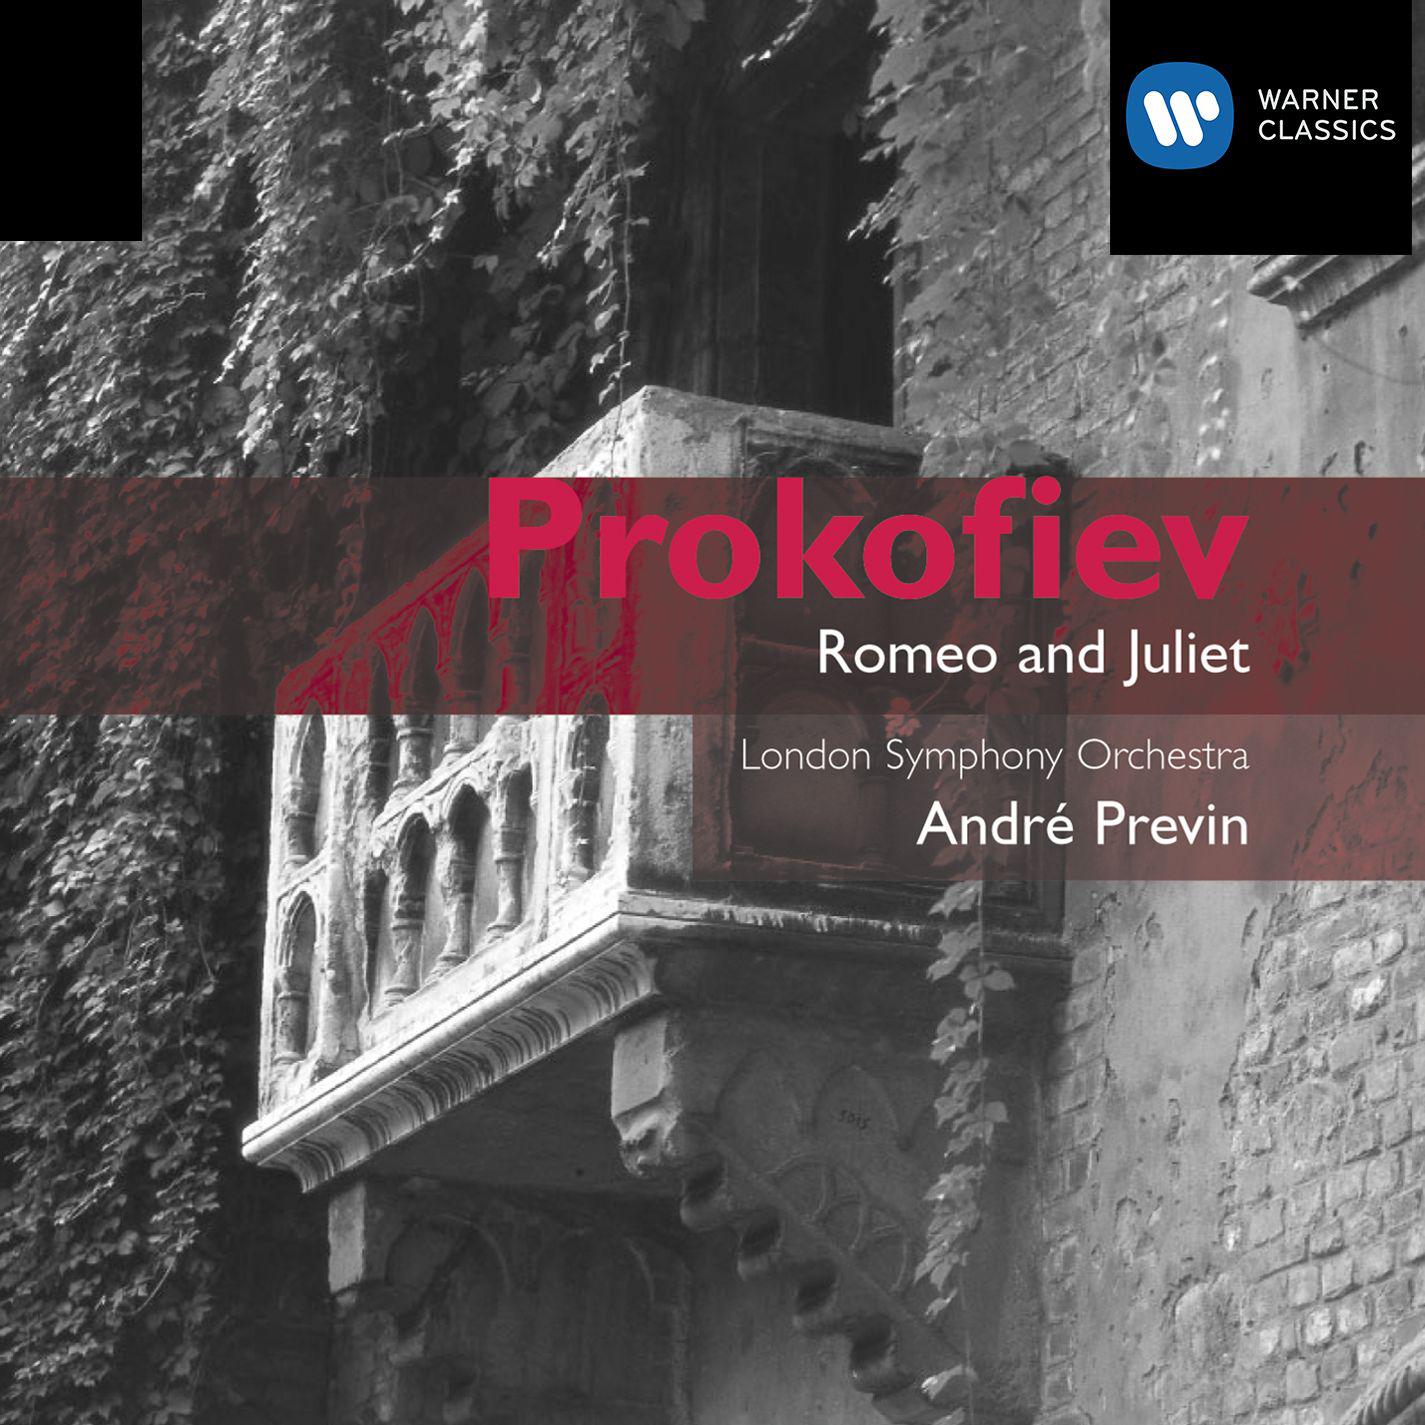 Romeo and Juliet (Complete Ballet), Op. 64, Act 1:No. 18, Departure of the Guests (Gavotte)